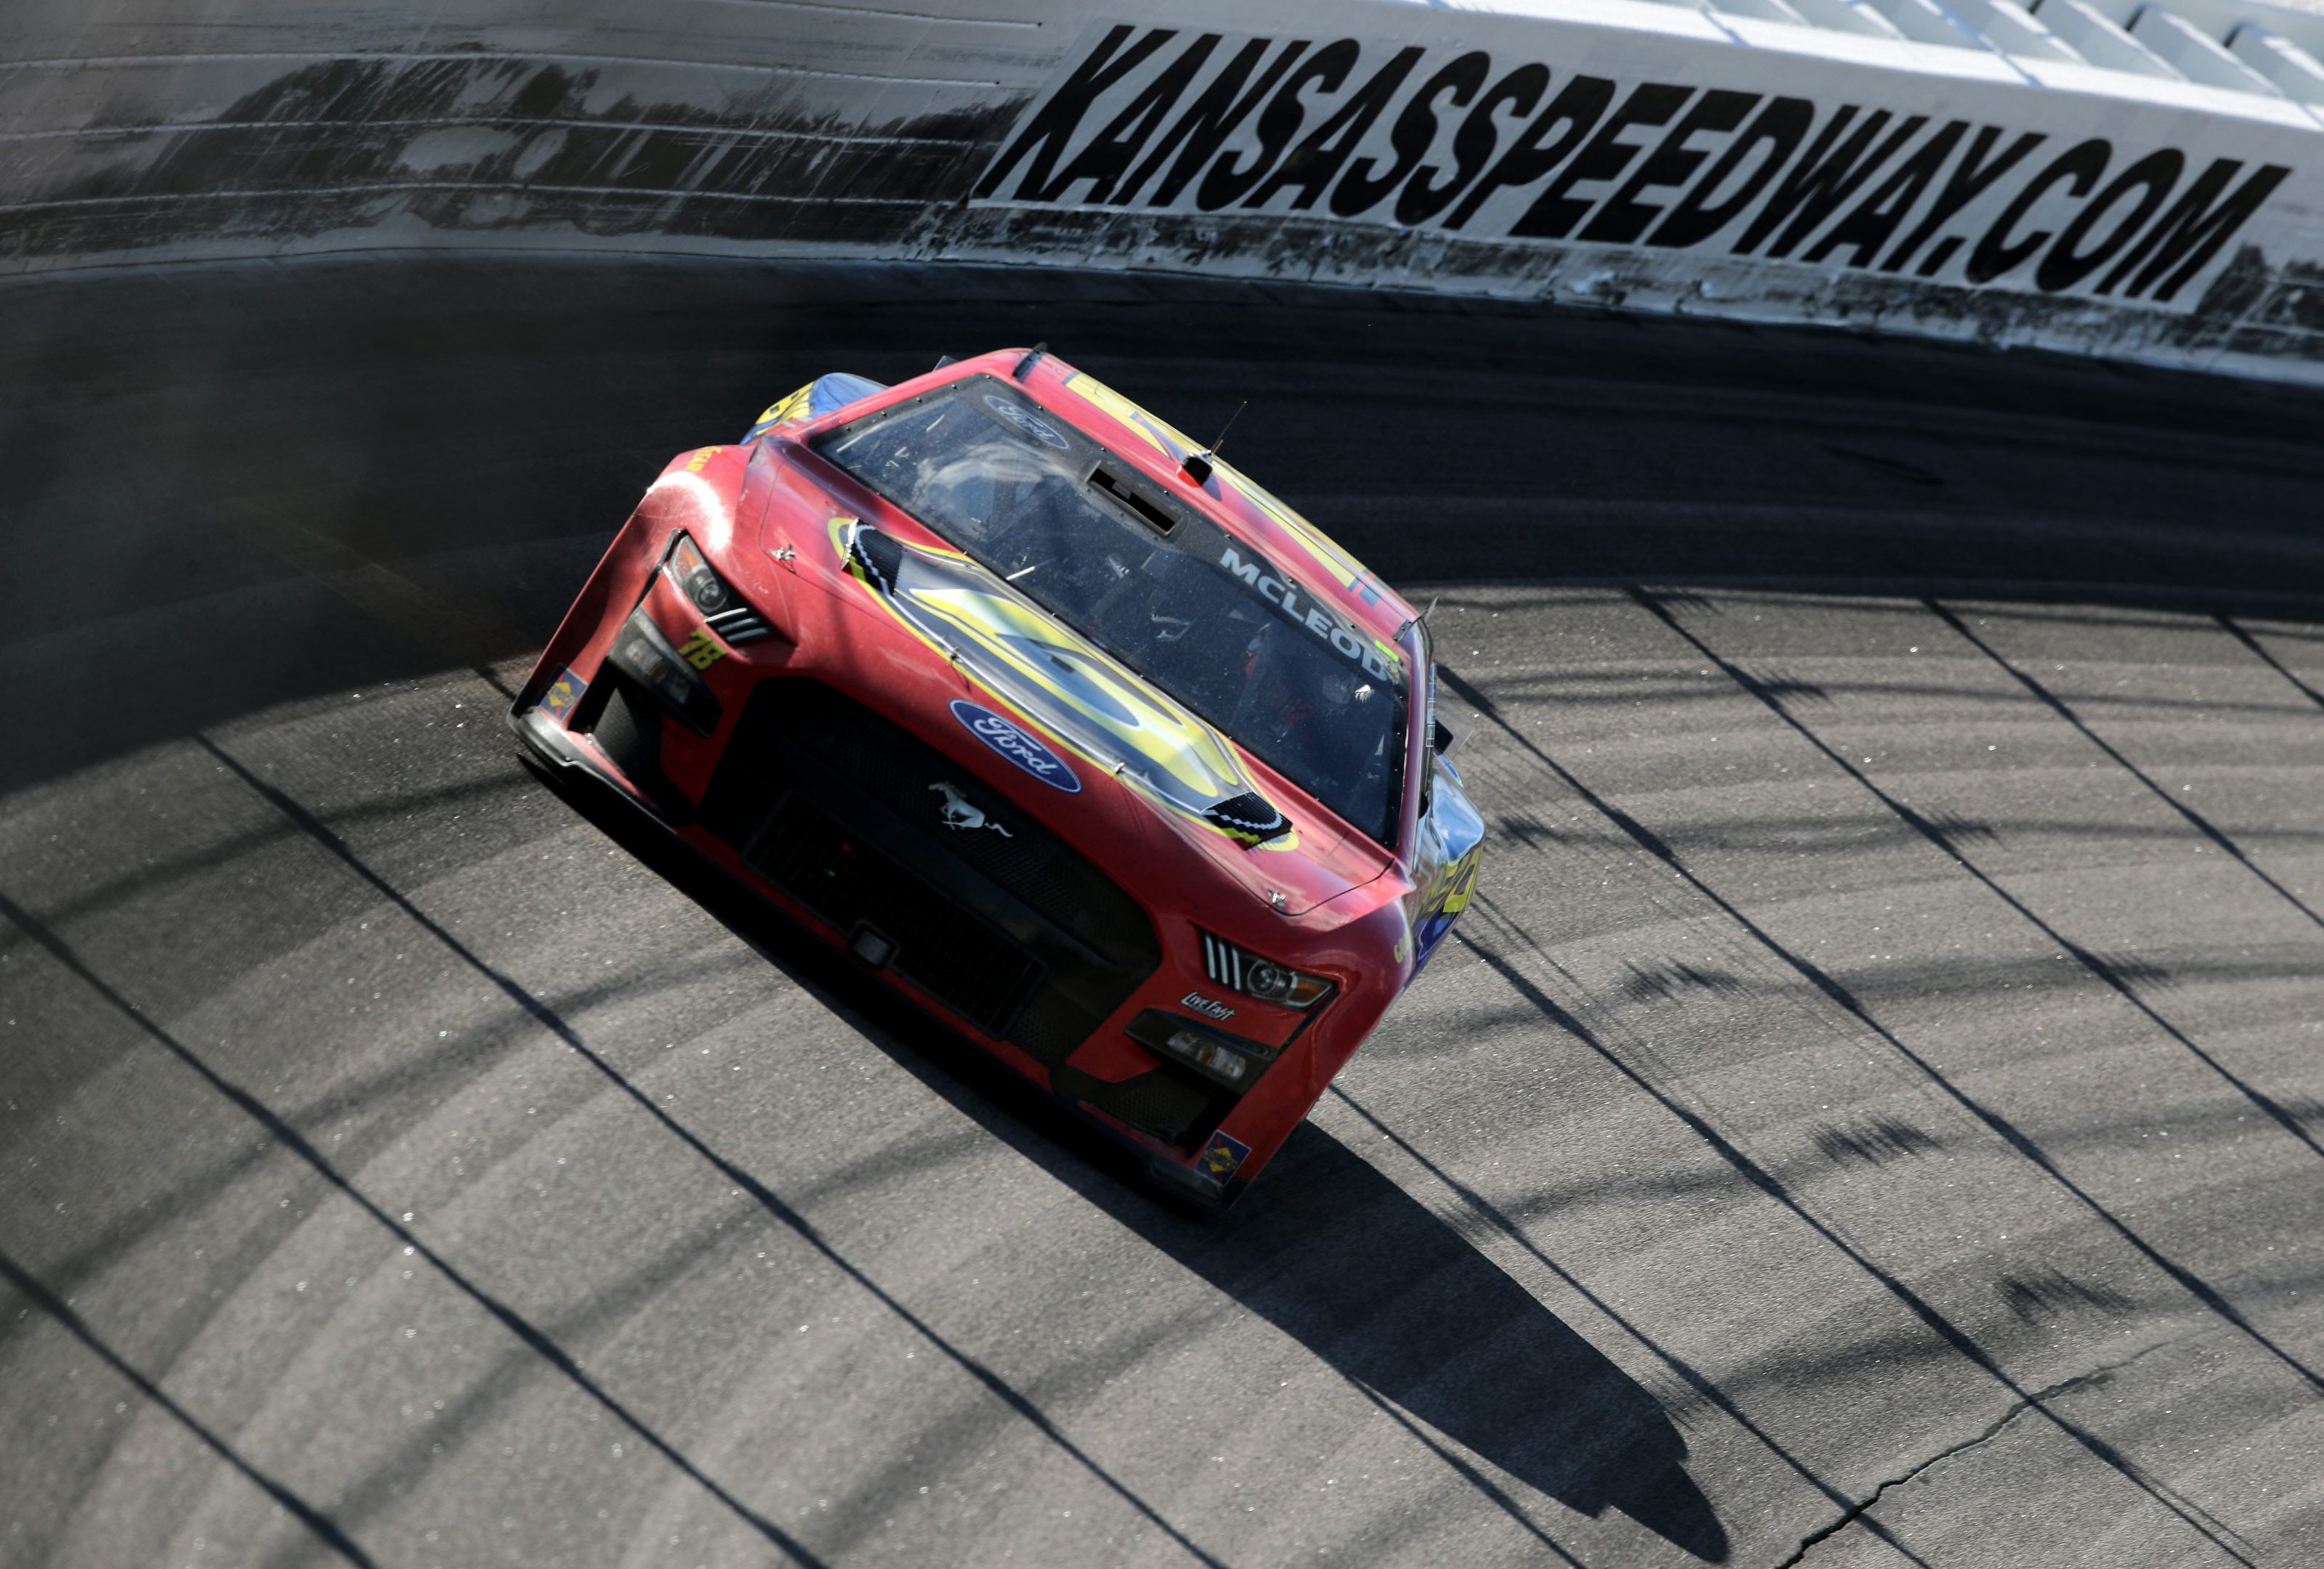 NASCAR 3 teams that still need drivers for the 2023 season